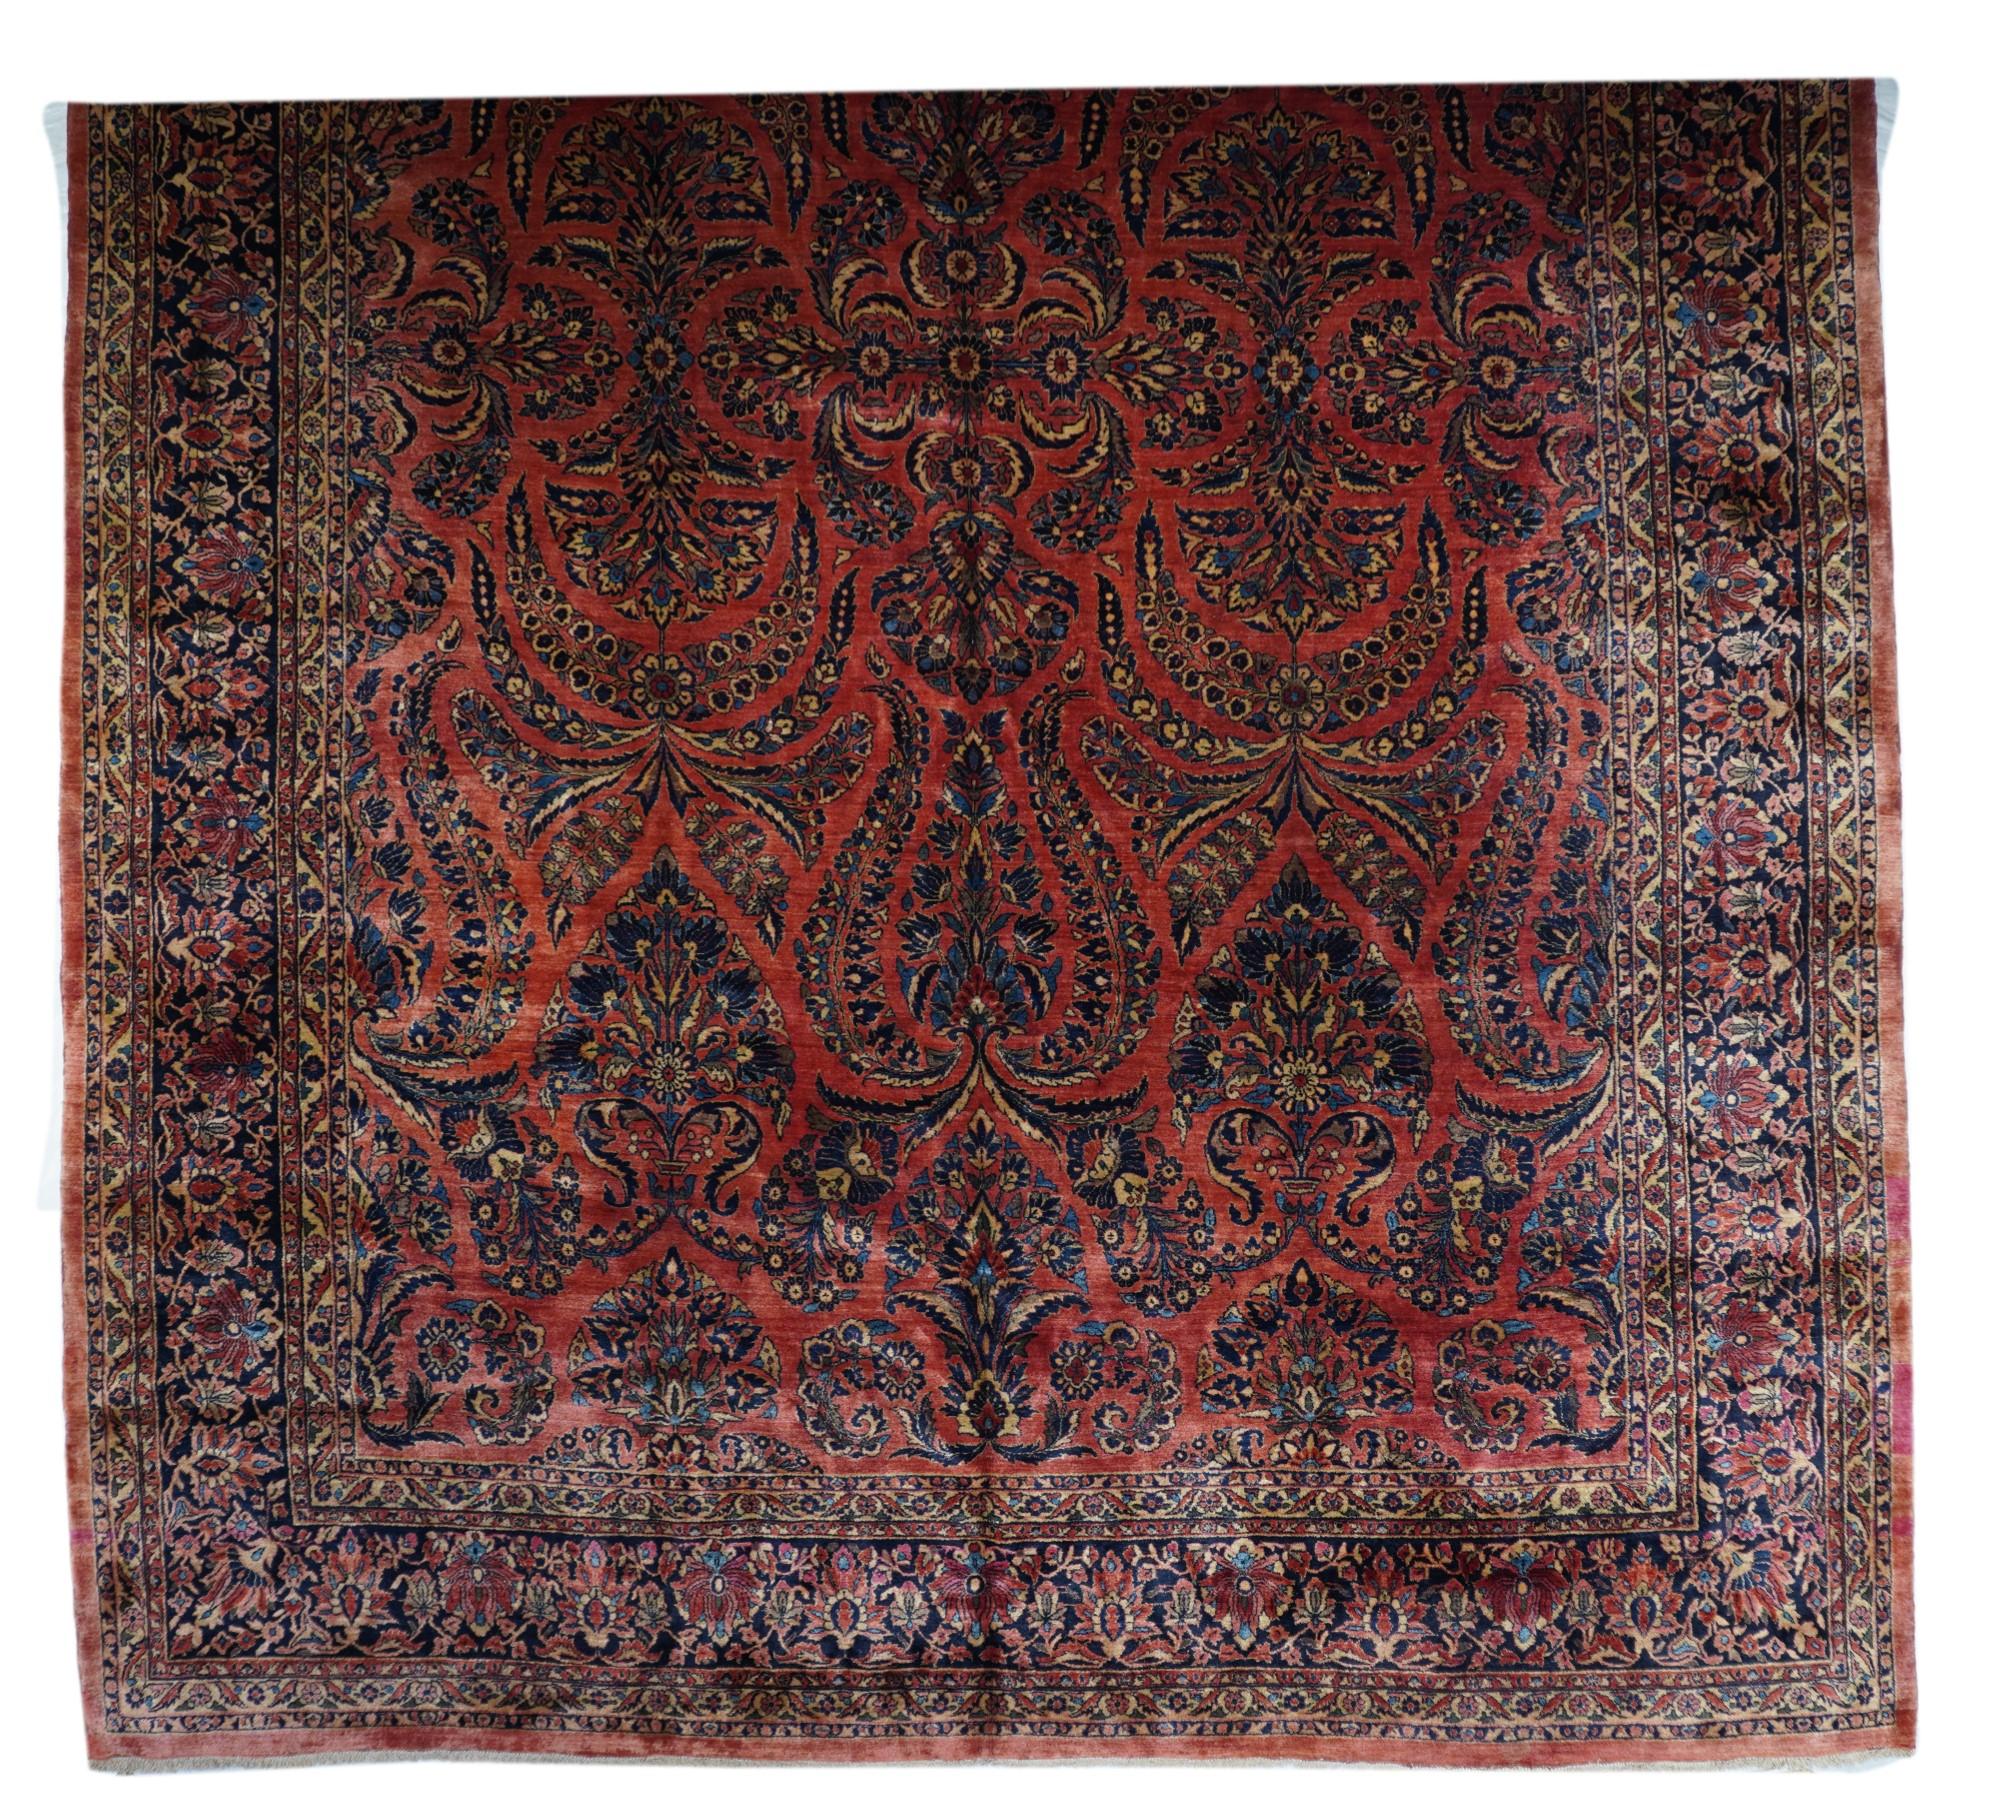 The scarlet – rose field of this exuberant “American style” west Persian village carpet shows vigourous floral sprays, flower clusters and barbed leaves, all set around a centre of 12 bitonal lancet leaves. Navy border with two varieties of in and